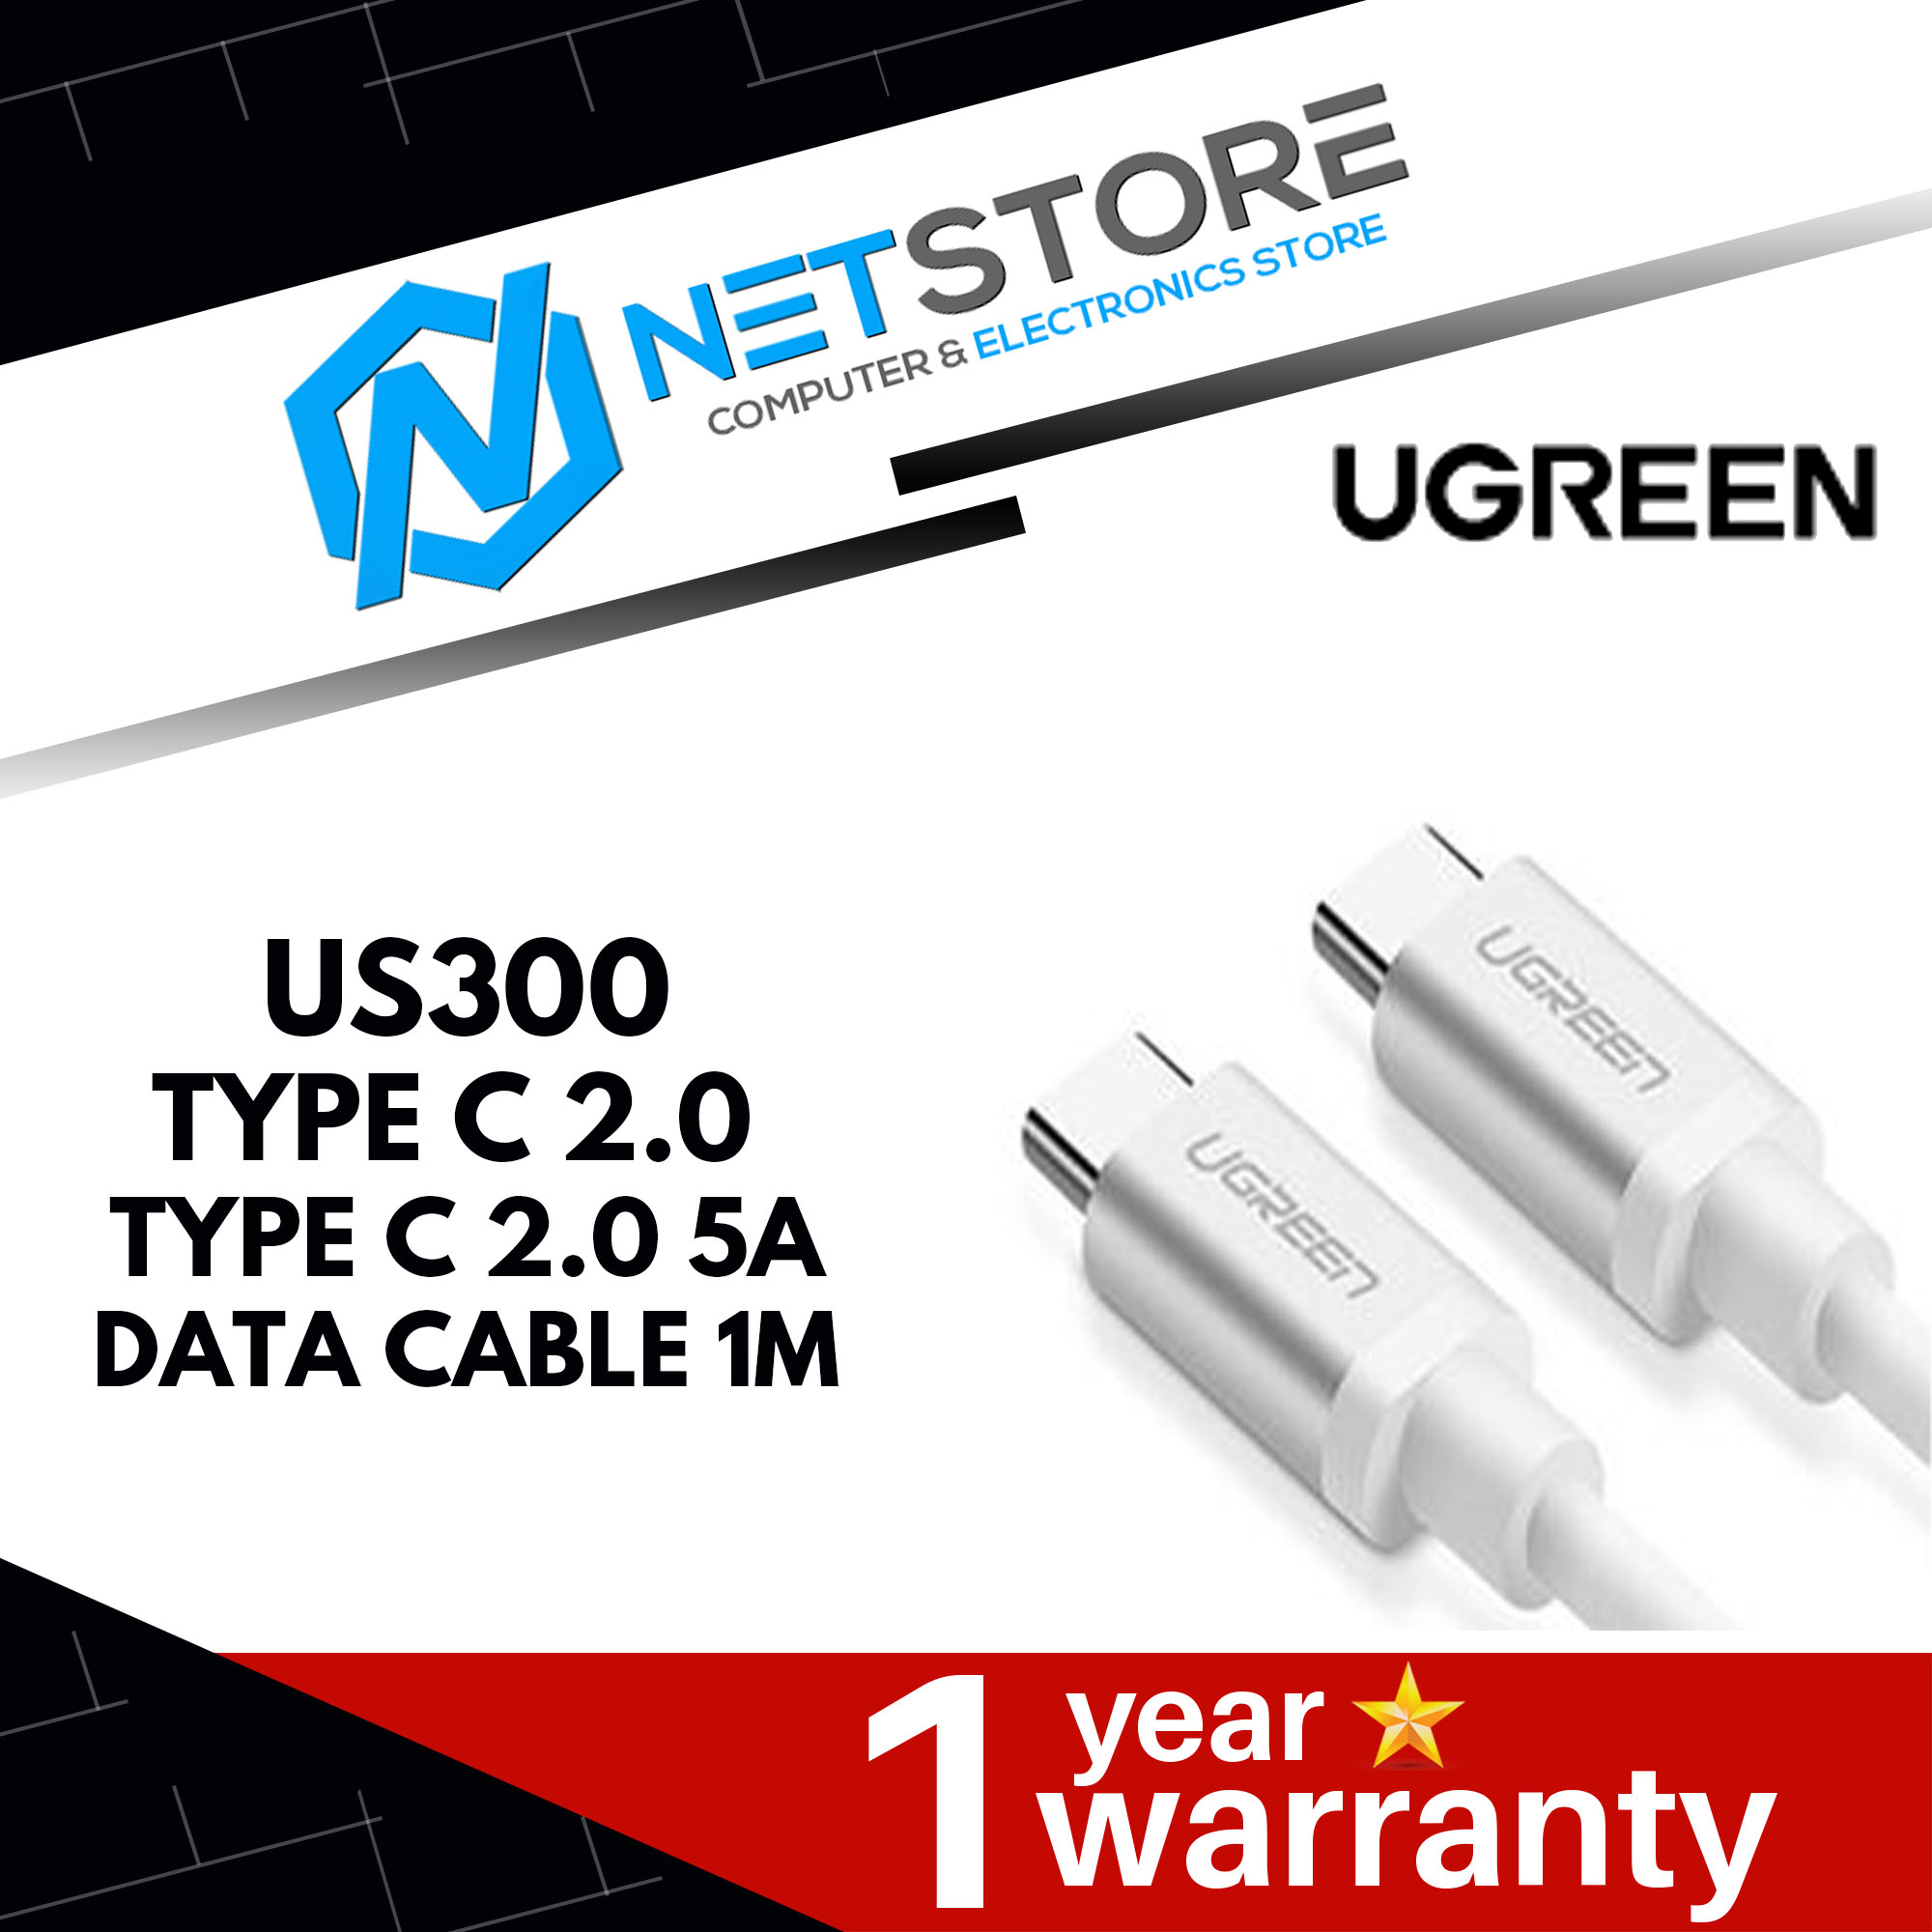 UGREEN US300 TYPE C 2.0 TYPE C 2.0 5A DATA CABLE 1M - UG-60551